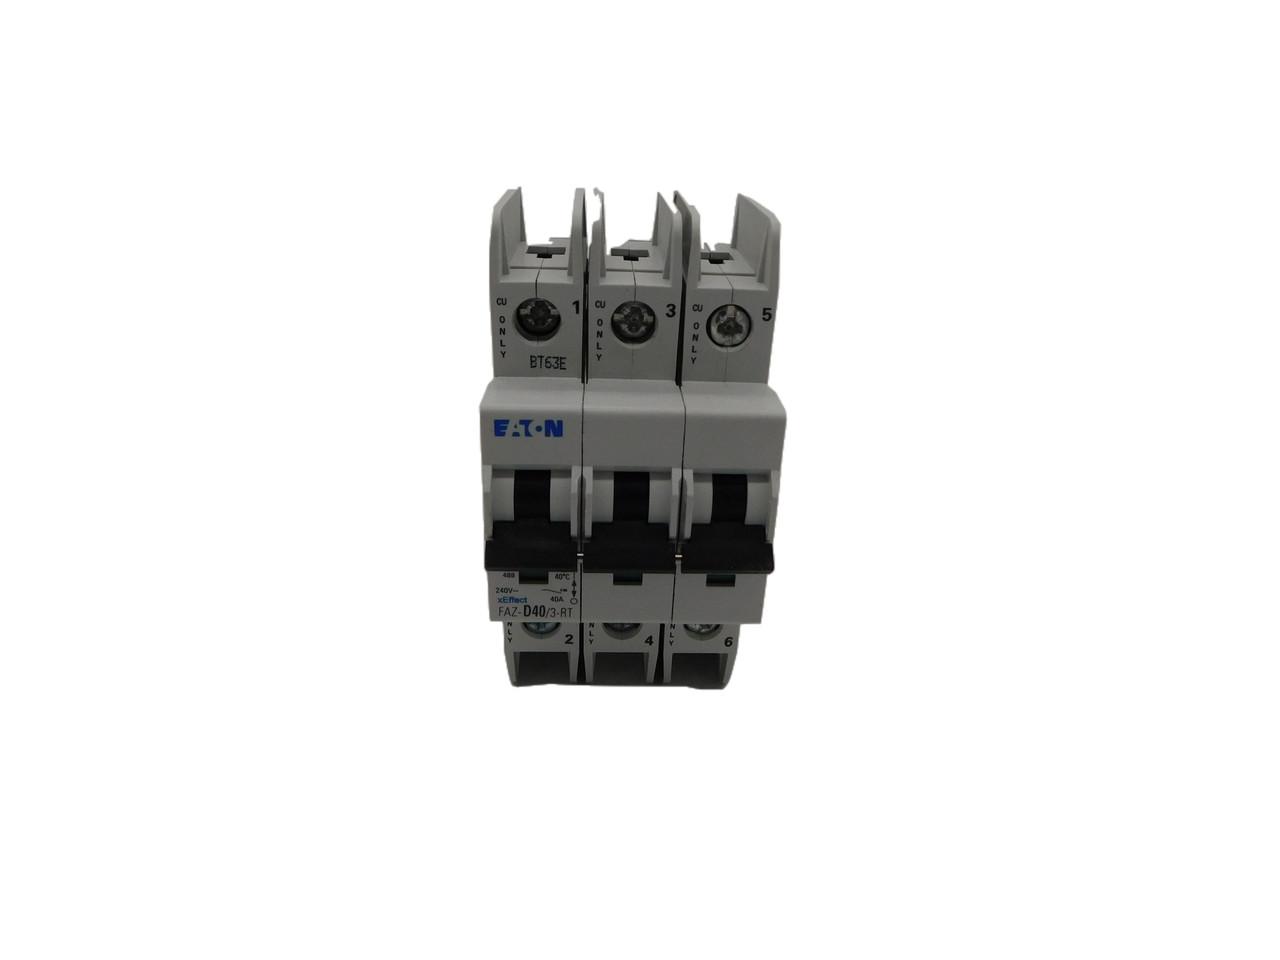 Eaton FAZ-D40/3-RT 277/480 VAC 50/60 Hz, 40 A, 3-Pole, 10/14 kA, 10 to 20 x Rated Current, Ring Tongue Terminal, DIN Rail Mount, Standard Packaging, D-Curve, Current Limiting, Thermal Magnetic